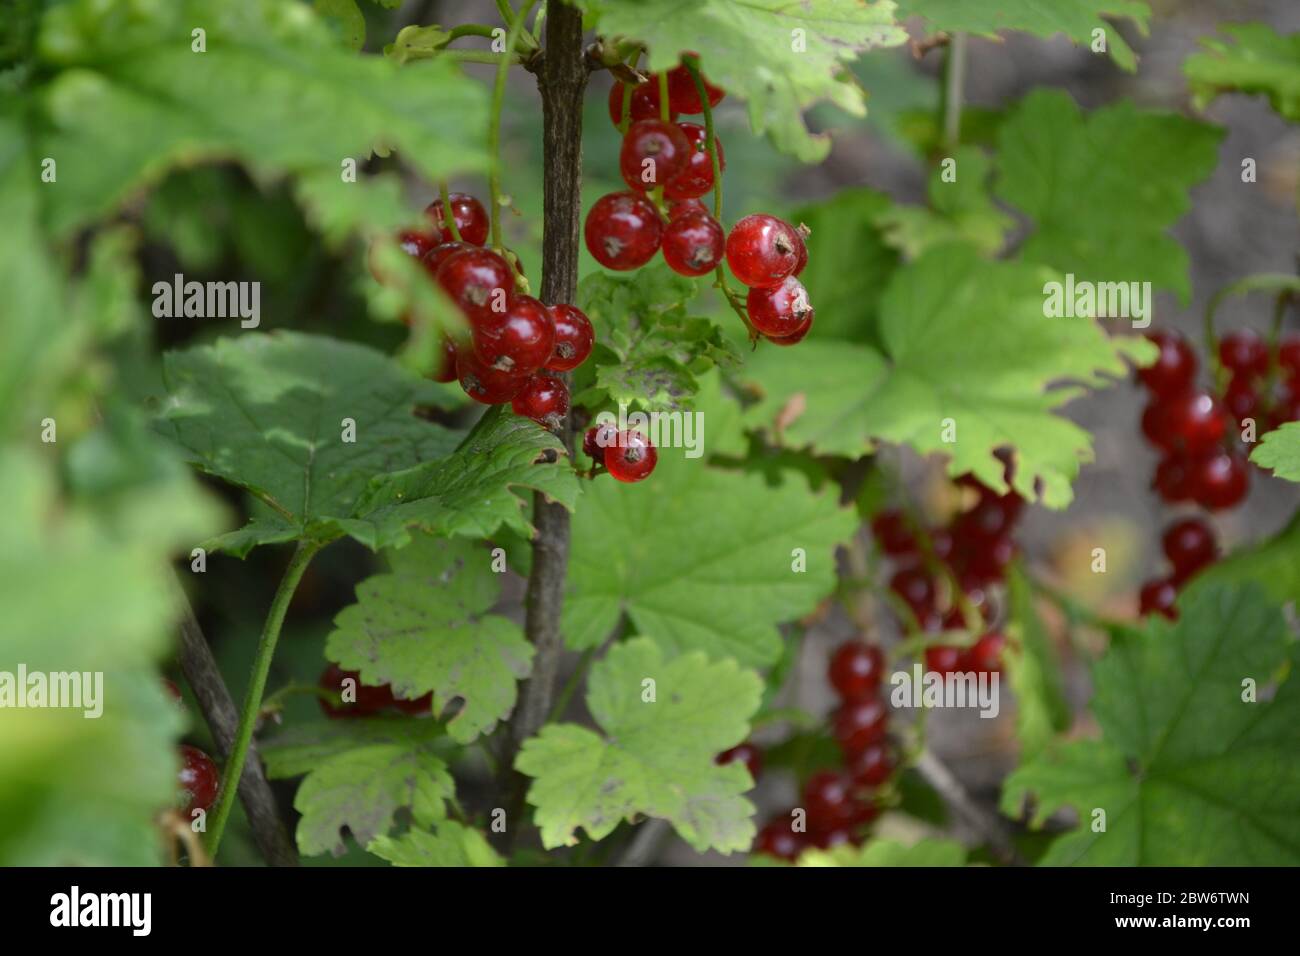 Gardening. Home garden, flower bed. Green leaves, bushes. Red juicy berries. Tasty and healthy. Red currant, ordinary, garden. Small deciduous shrub f Stock Photo